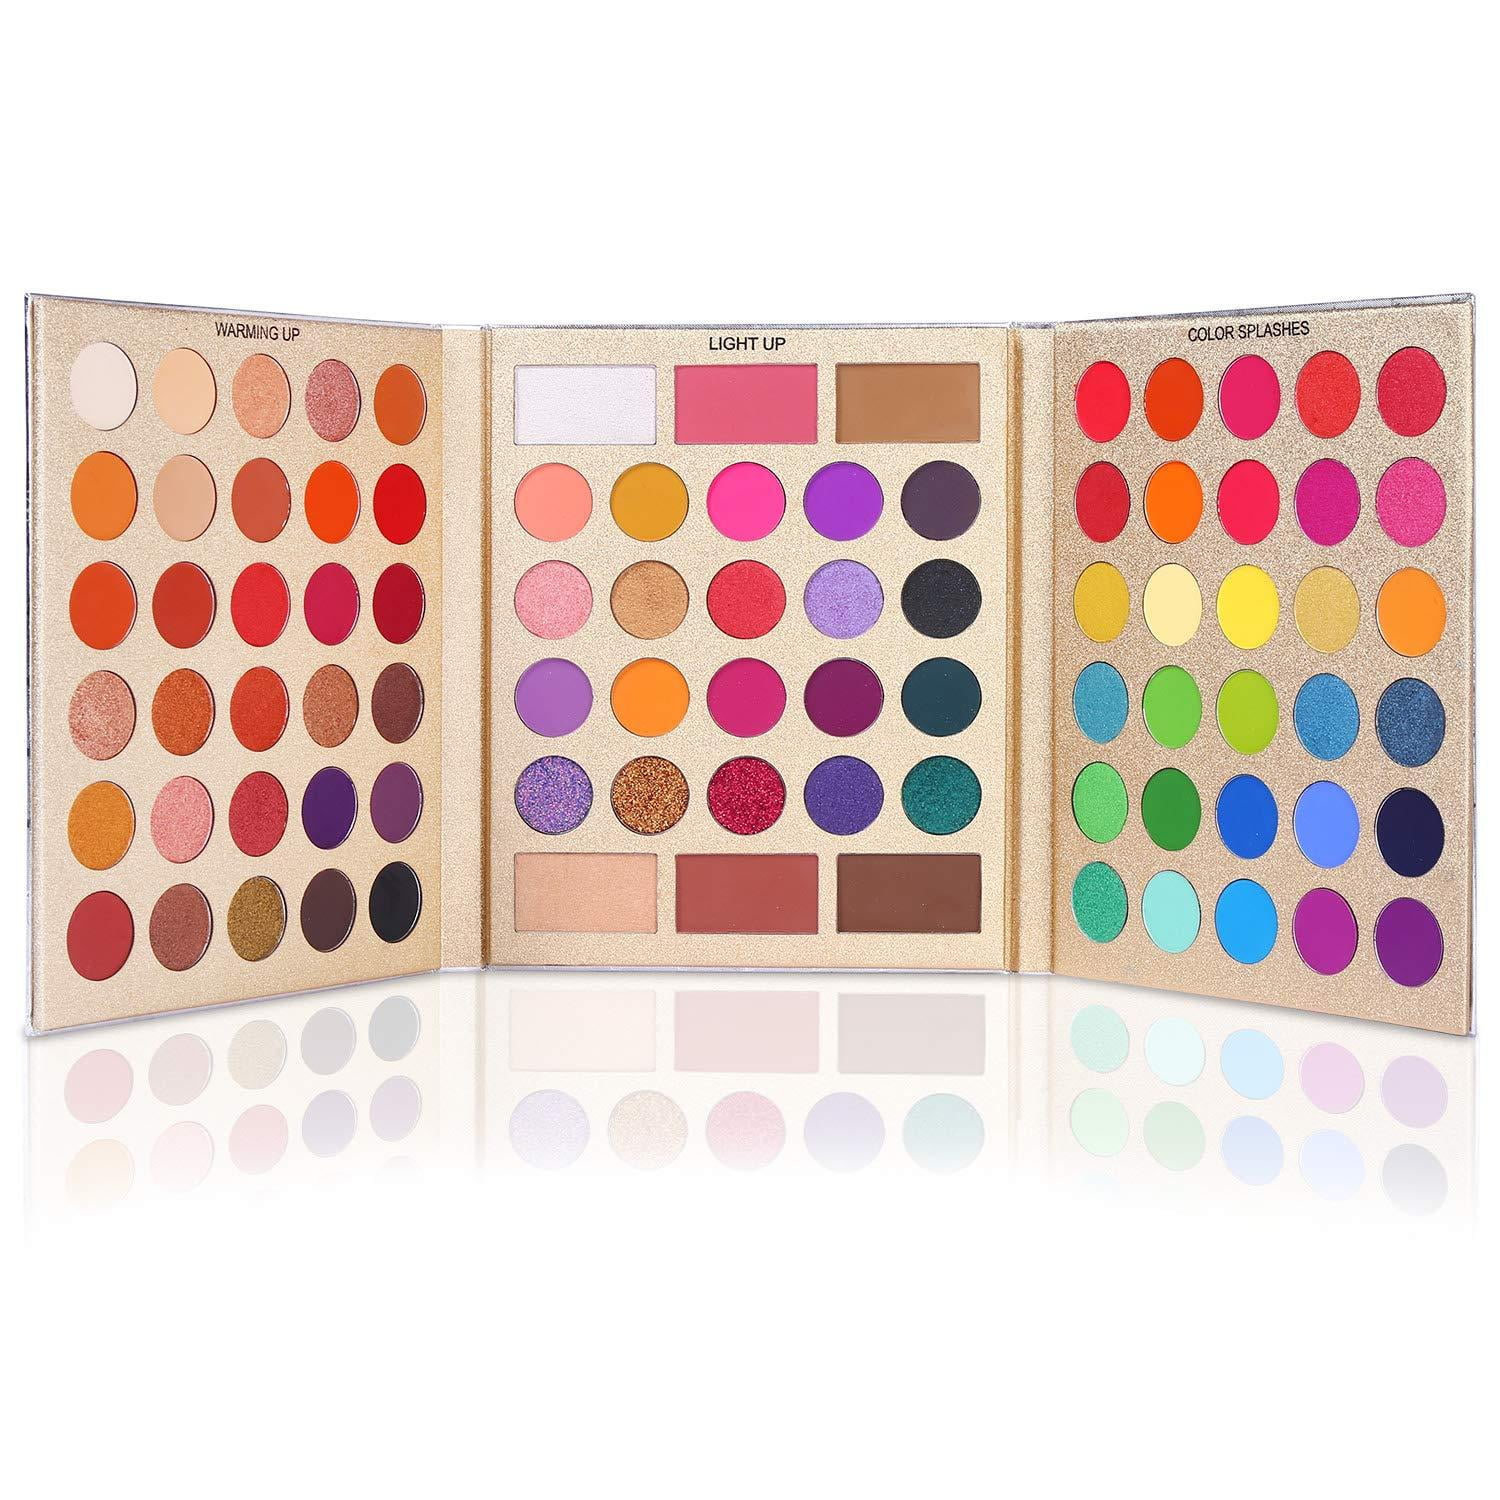 UCANBE Pretty All Set -Pro 86 Colors Eyeshadow Palette Makeup Gift